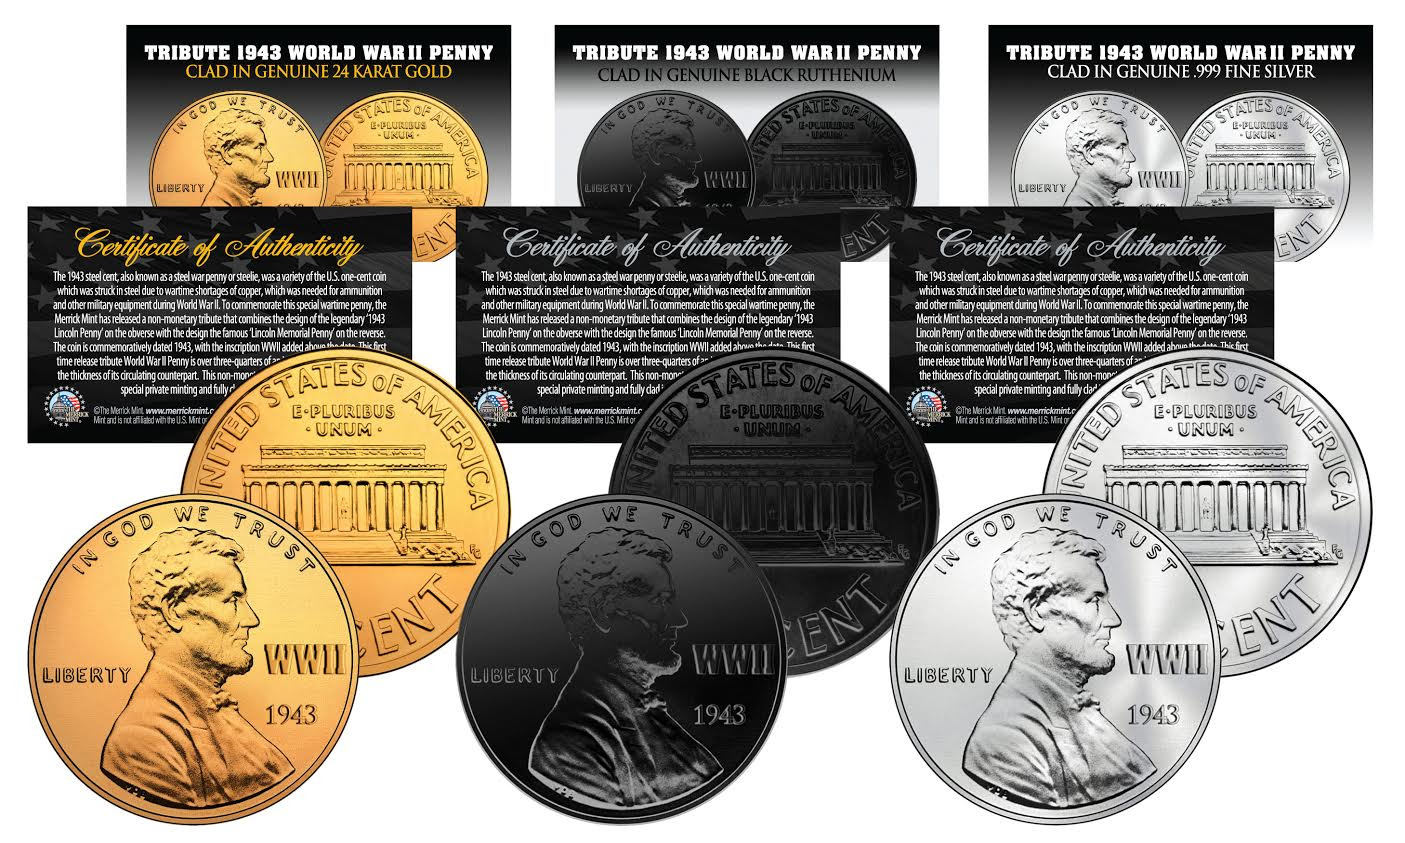 1943 TRIBUTE WWII Steel Penny Coins 3 Versions BLACK RUTHENIUM, 24K GOLD, SILVER